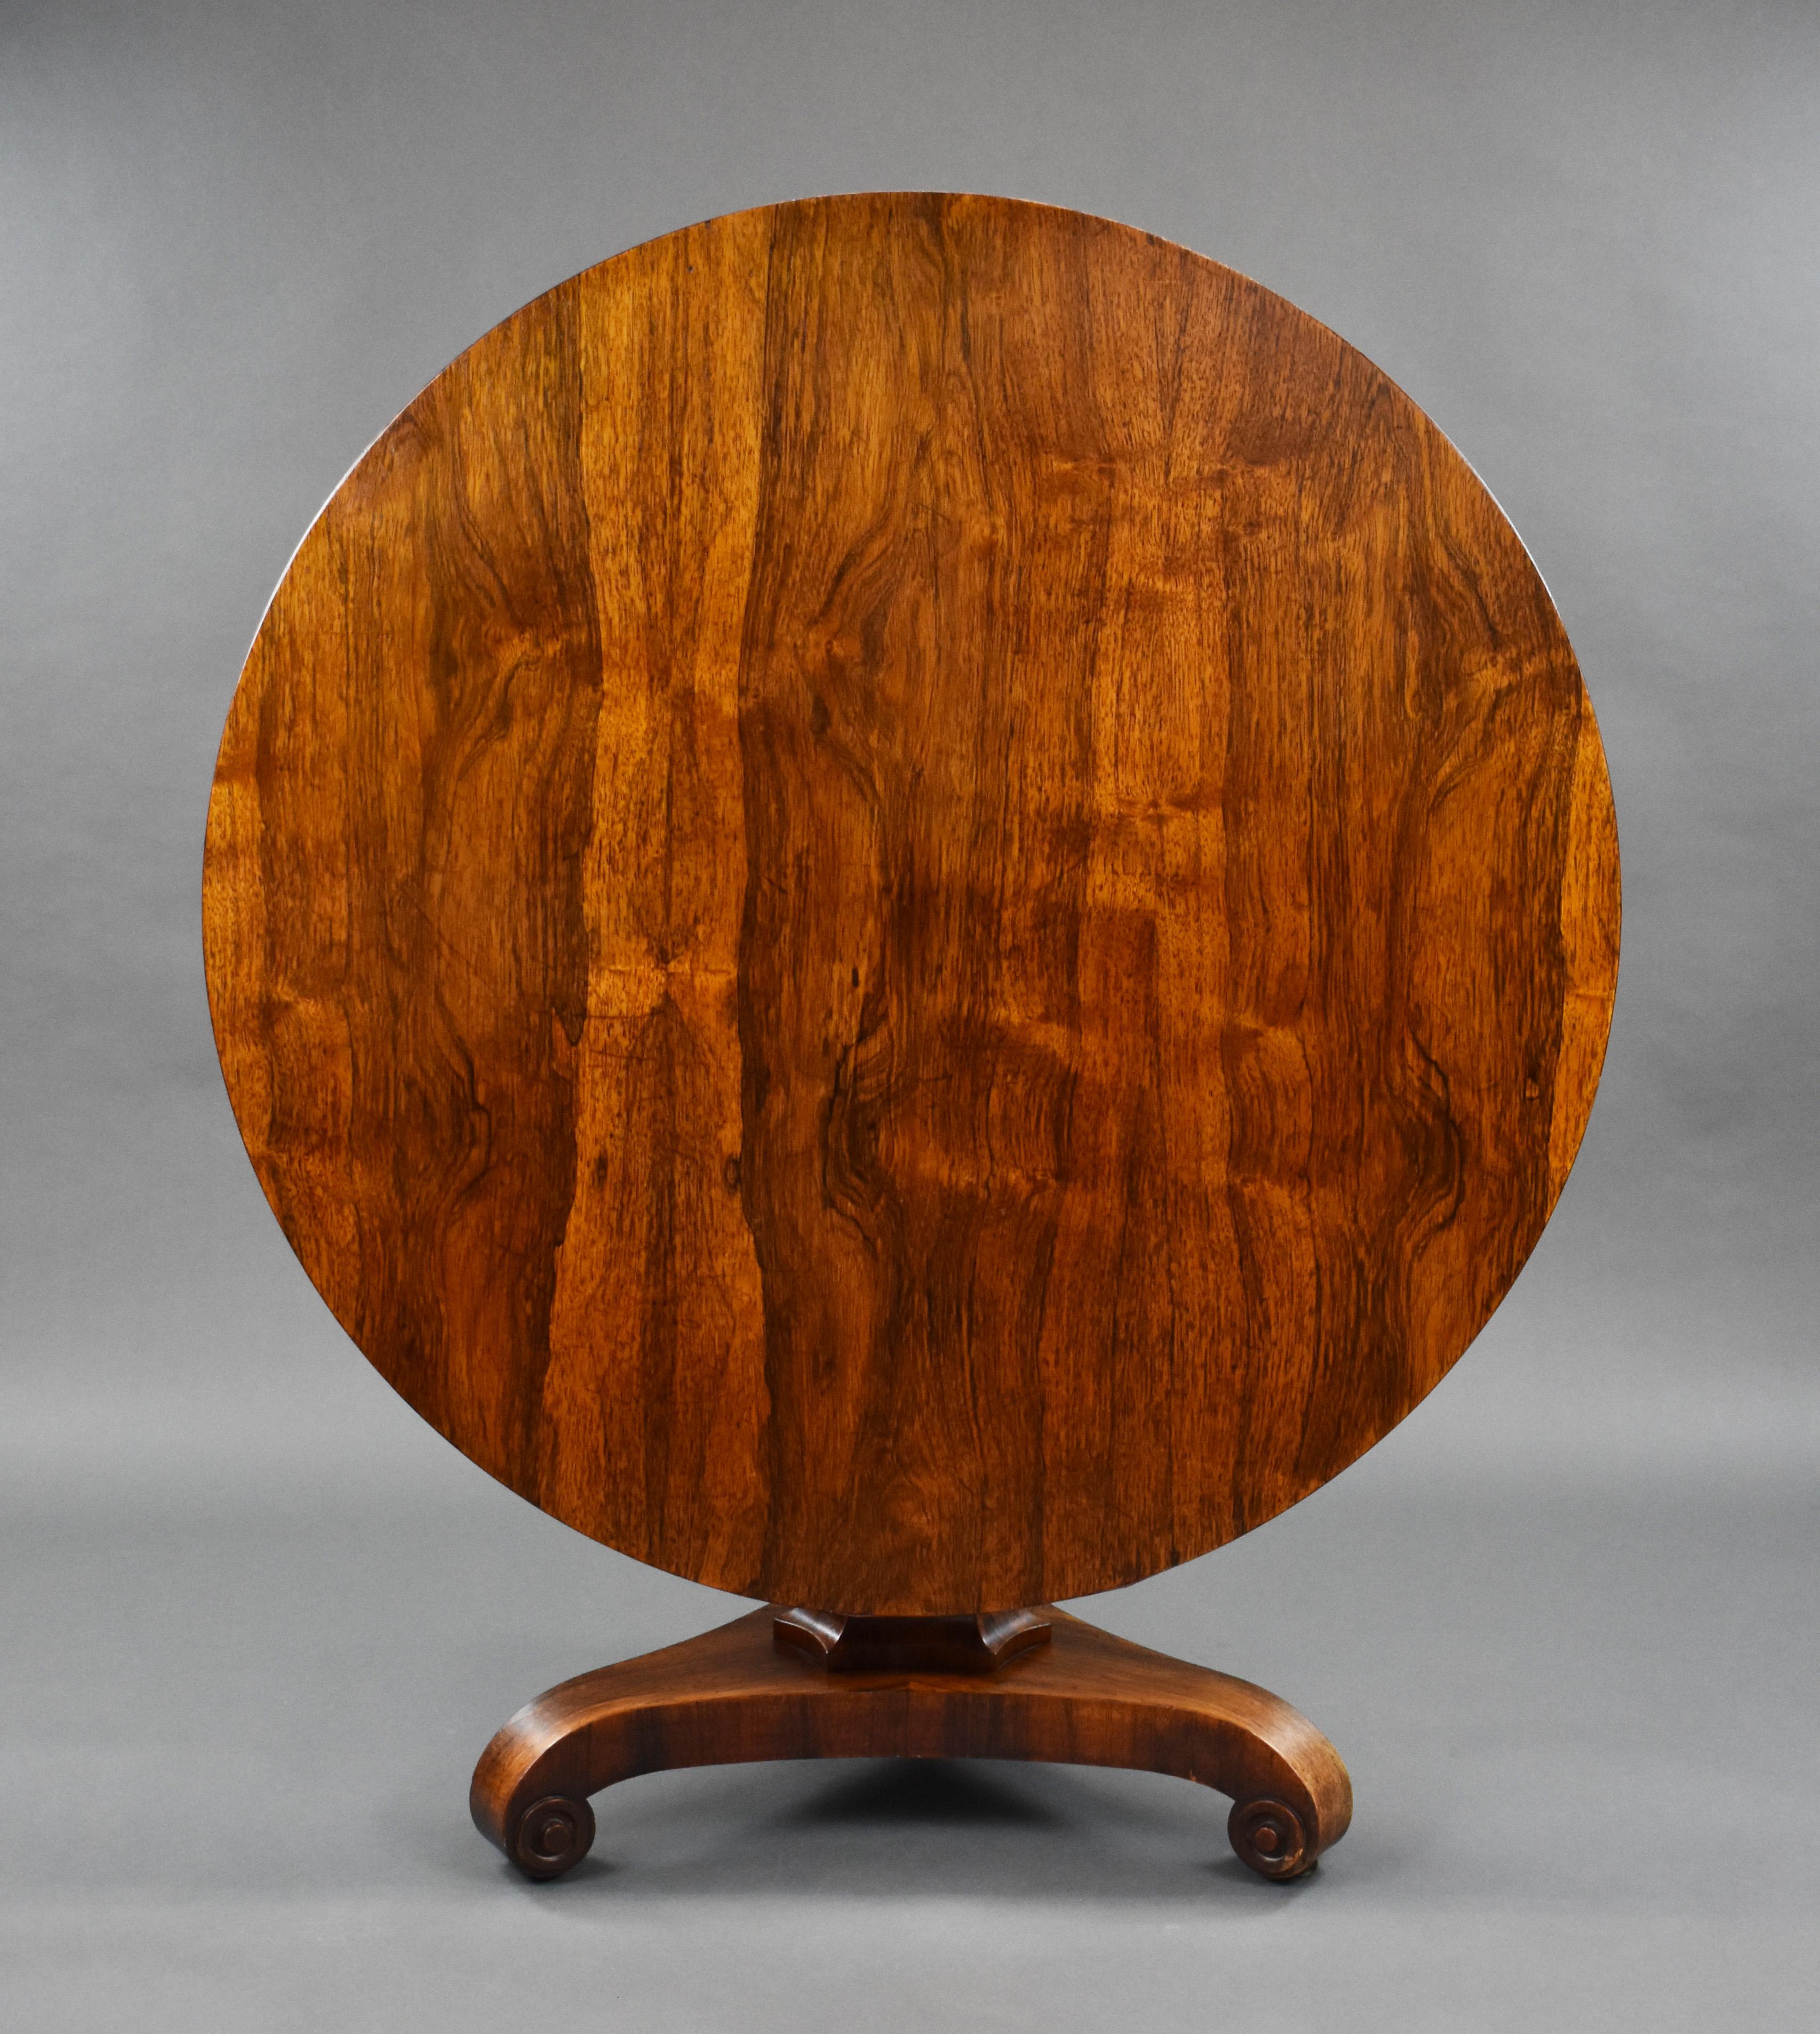 For sale is a Victorian rosewood circular breakfast table, having a well figured top above a shaped stem, over a platform base standing on scroll feet raised on original castors. The table remains in good condition, showing minor wear commensurate